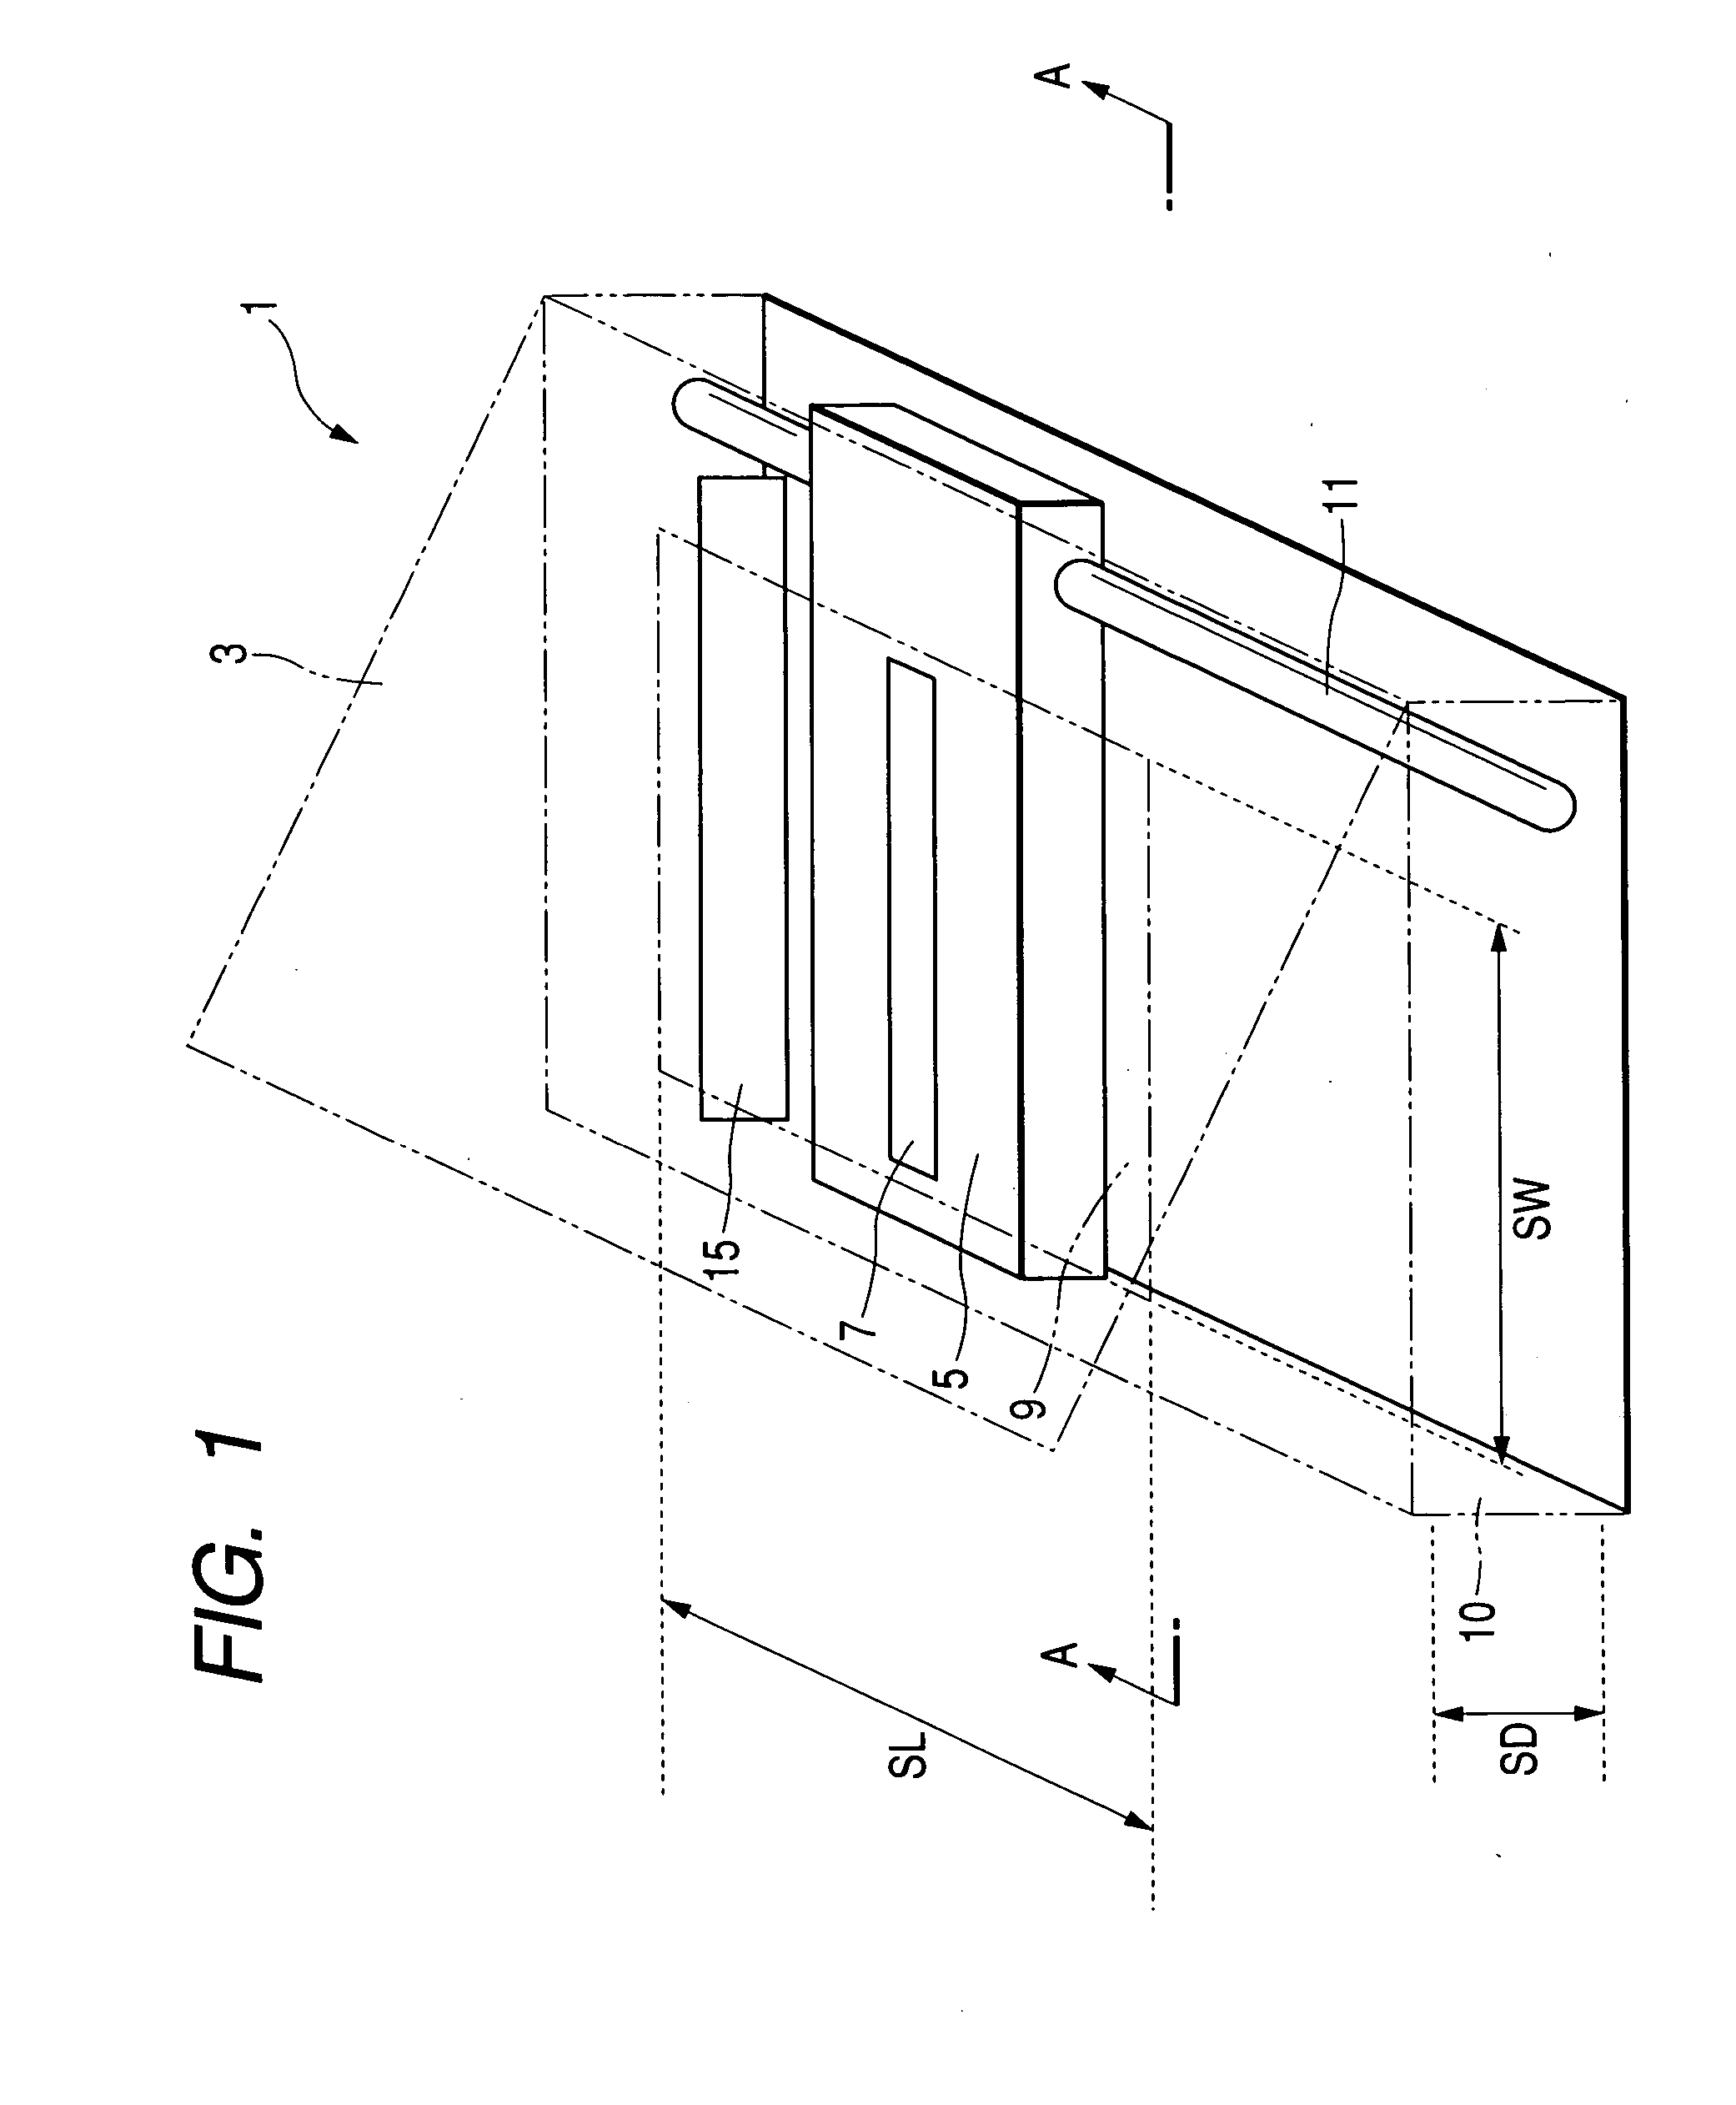 Image scanner provided with power saving mode and a system having a power saving mode